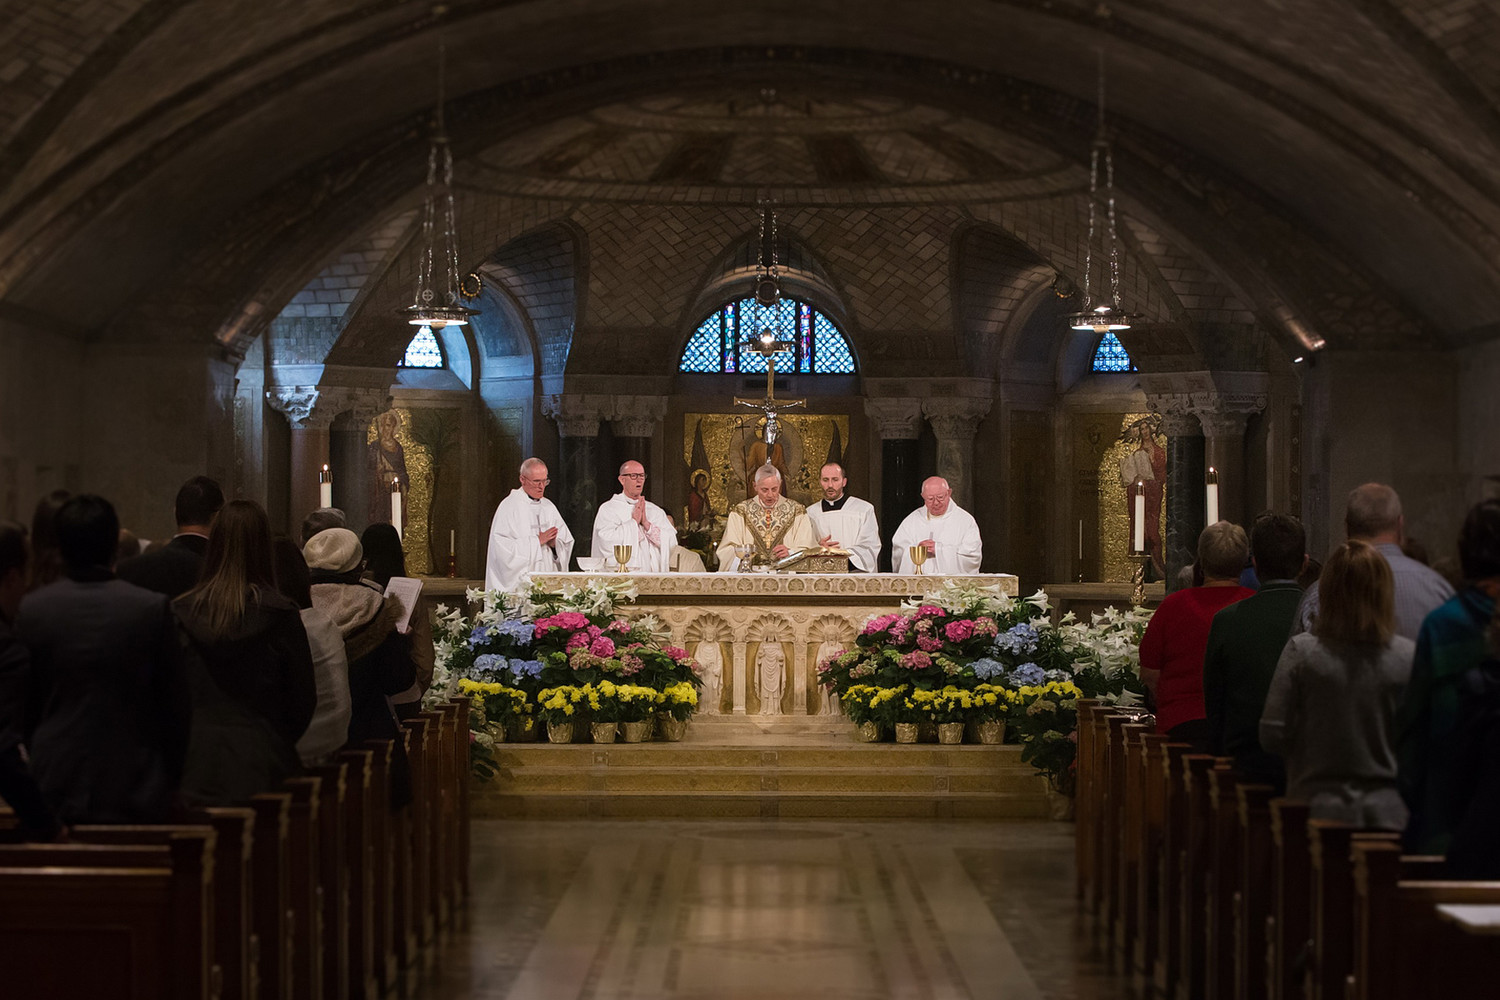 Cardinal Donald W. Wuerl of Washington concelebrates the April 6 closing Mass for a symposium marking the 50th anniversary of Blessed Pope Paul VI’s encyclical “Humanae Vitae.” The Mass was celebrated in the Crypt Church at the Basilica of the National Shrine of the Immaculate Conception in Washington.